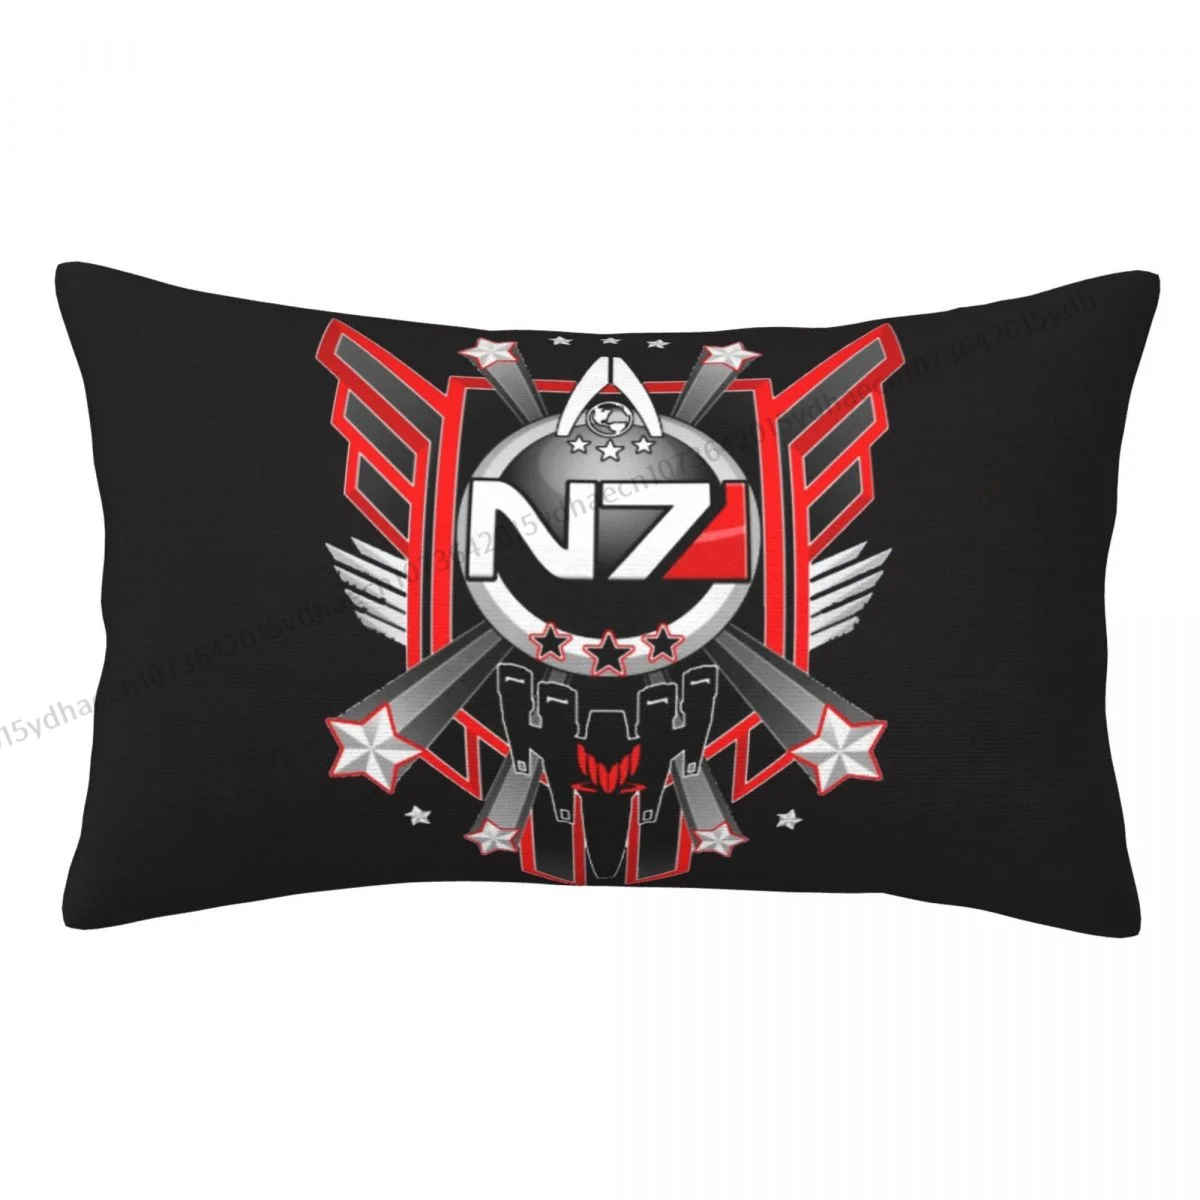 

N7 Normandy Hug Pillowcase Mass Effect Game Backpack Cojines Bedroom Printed Chair Pillow Covers Decorative